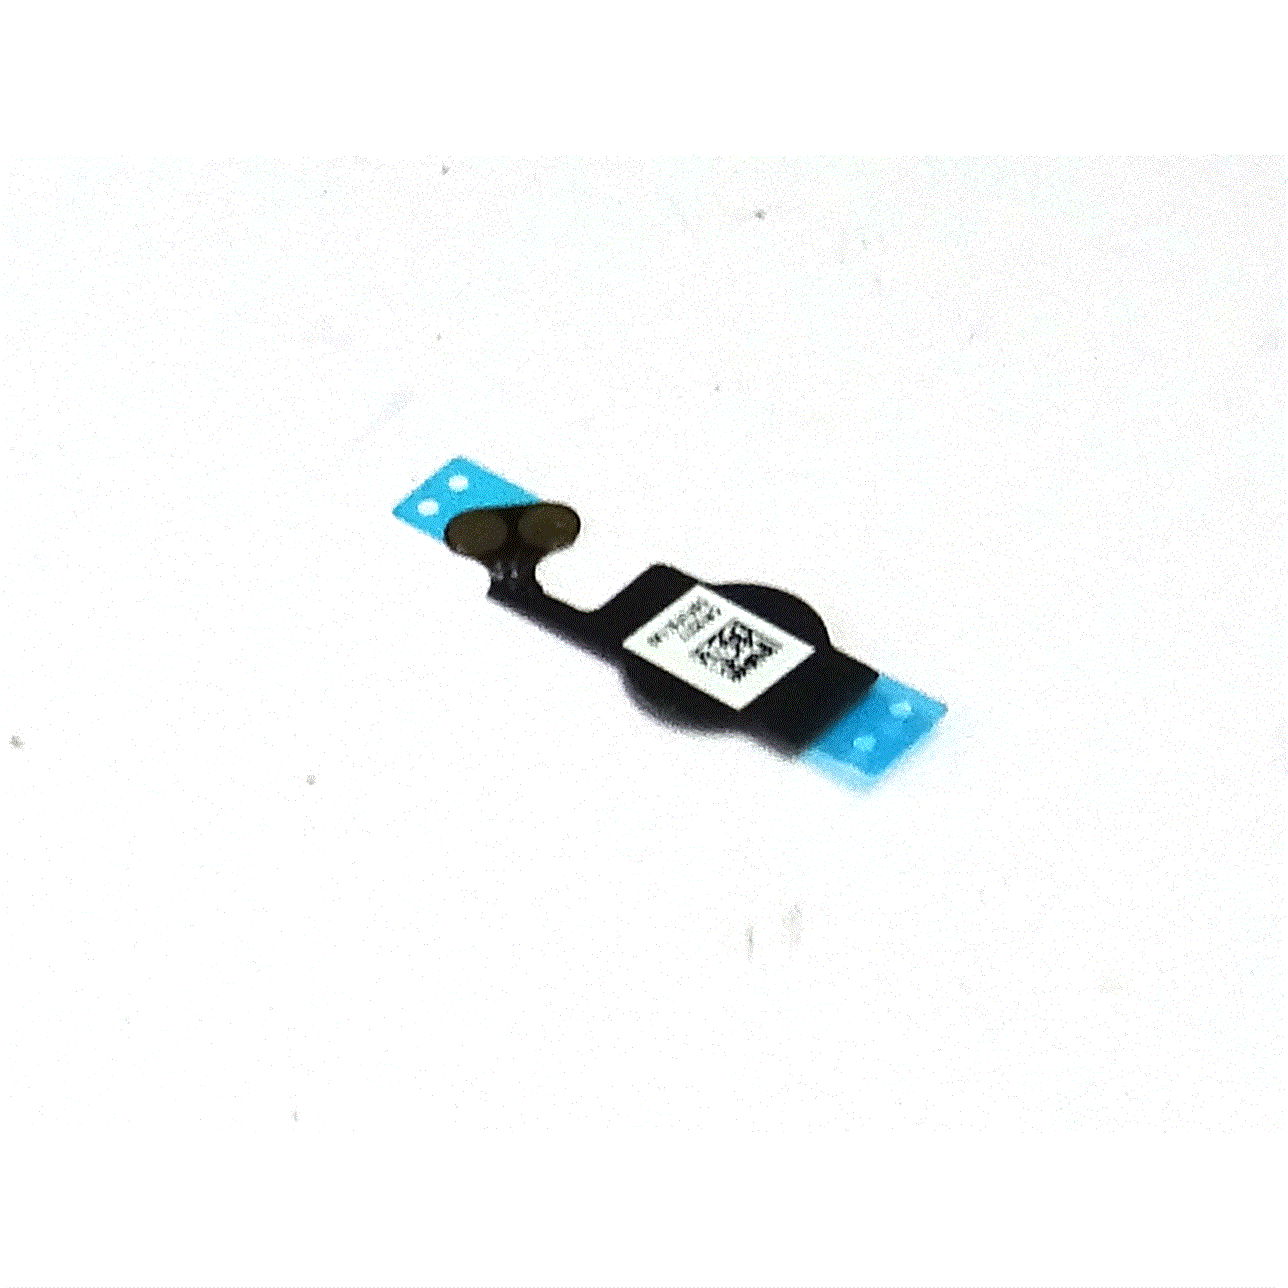 Home Button Return Keypad Flex Cable Ribbon PCB Replacement For iPhone 5 - UK Seller